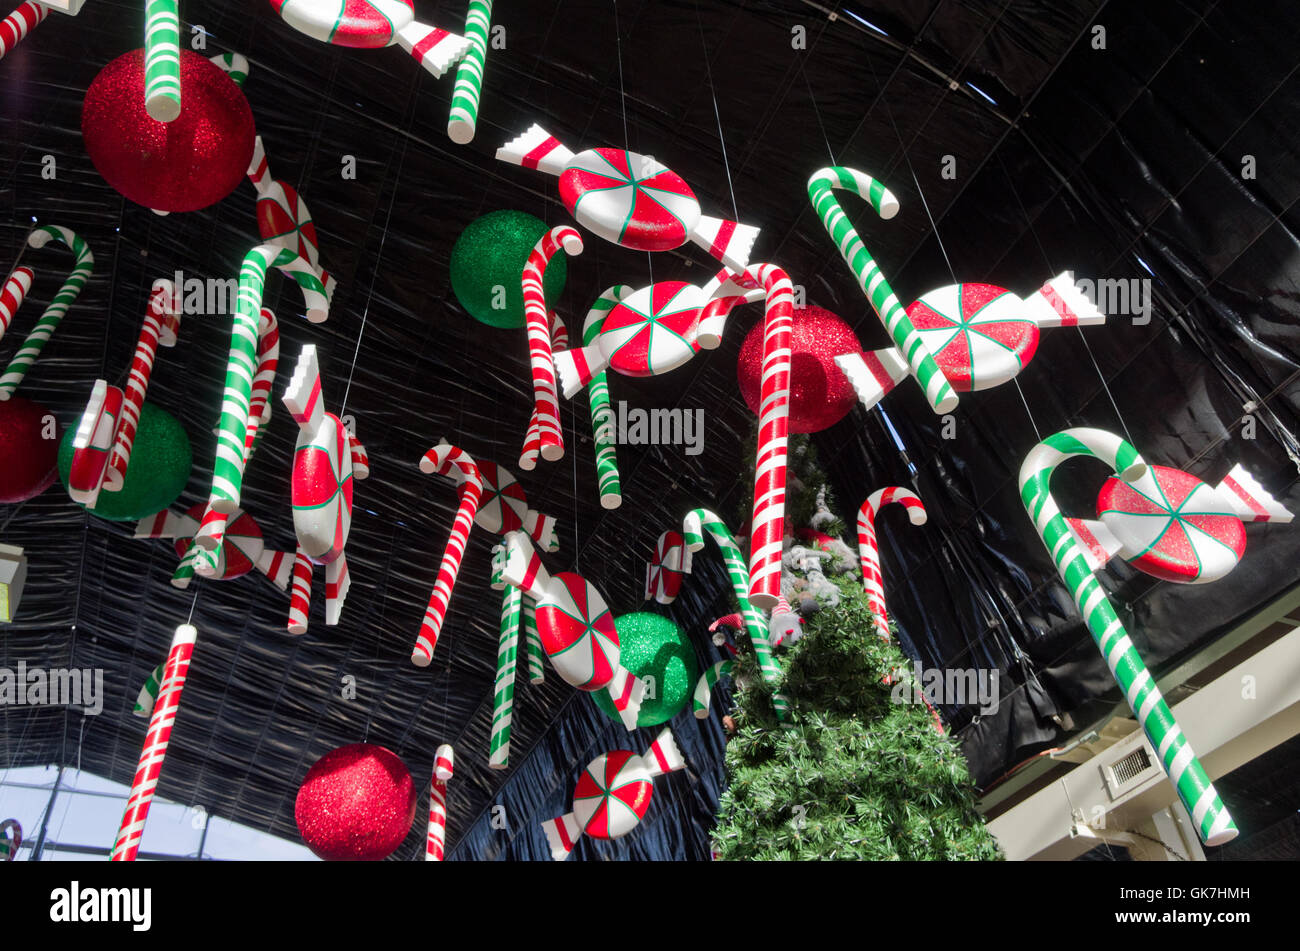 Colourful Christmas decorations suspended from the ceiling, part of a